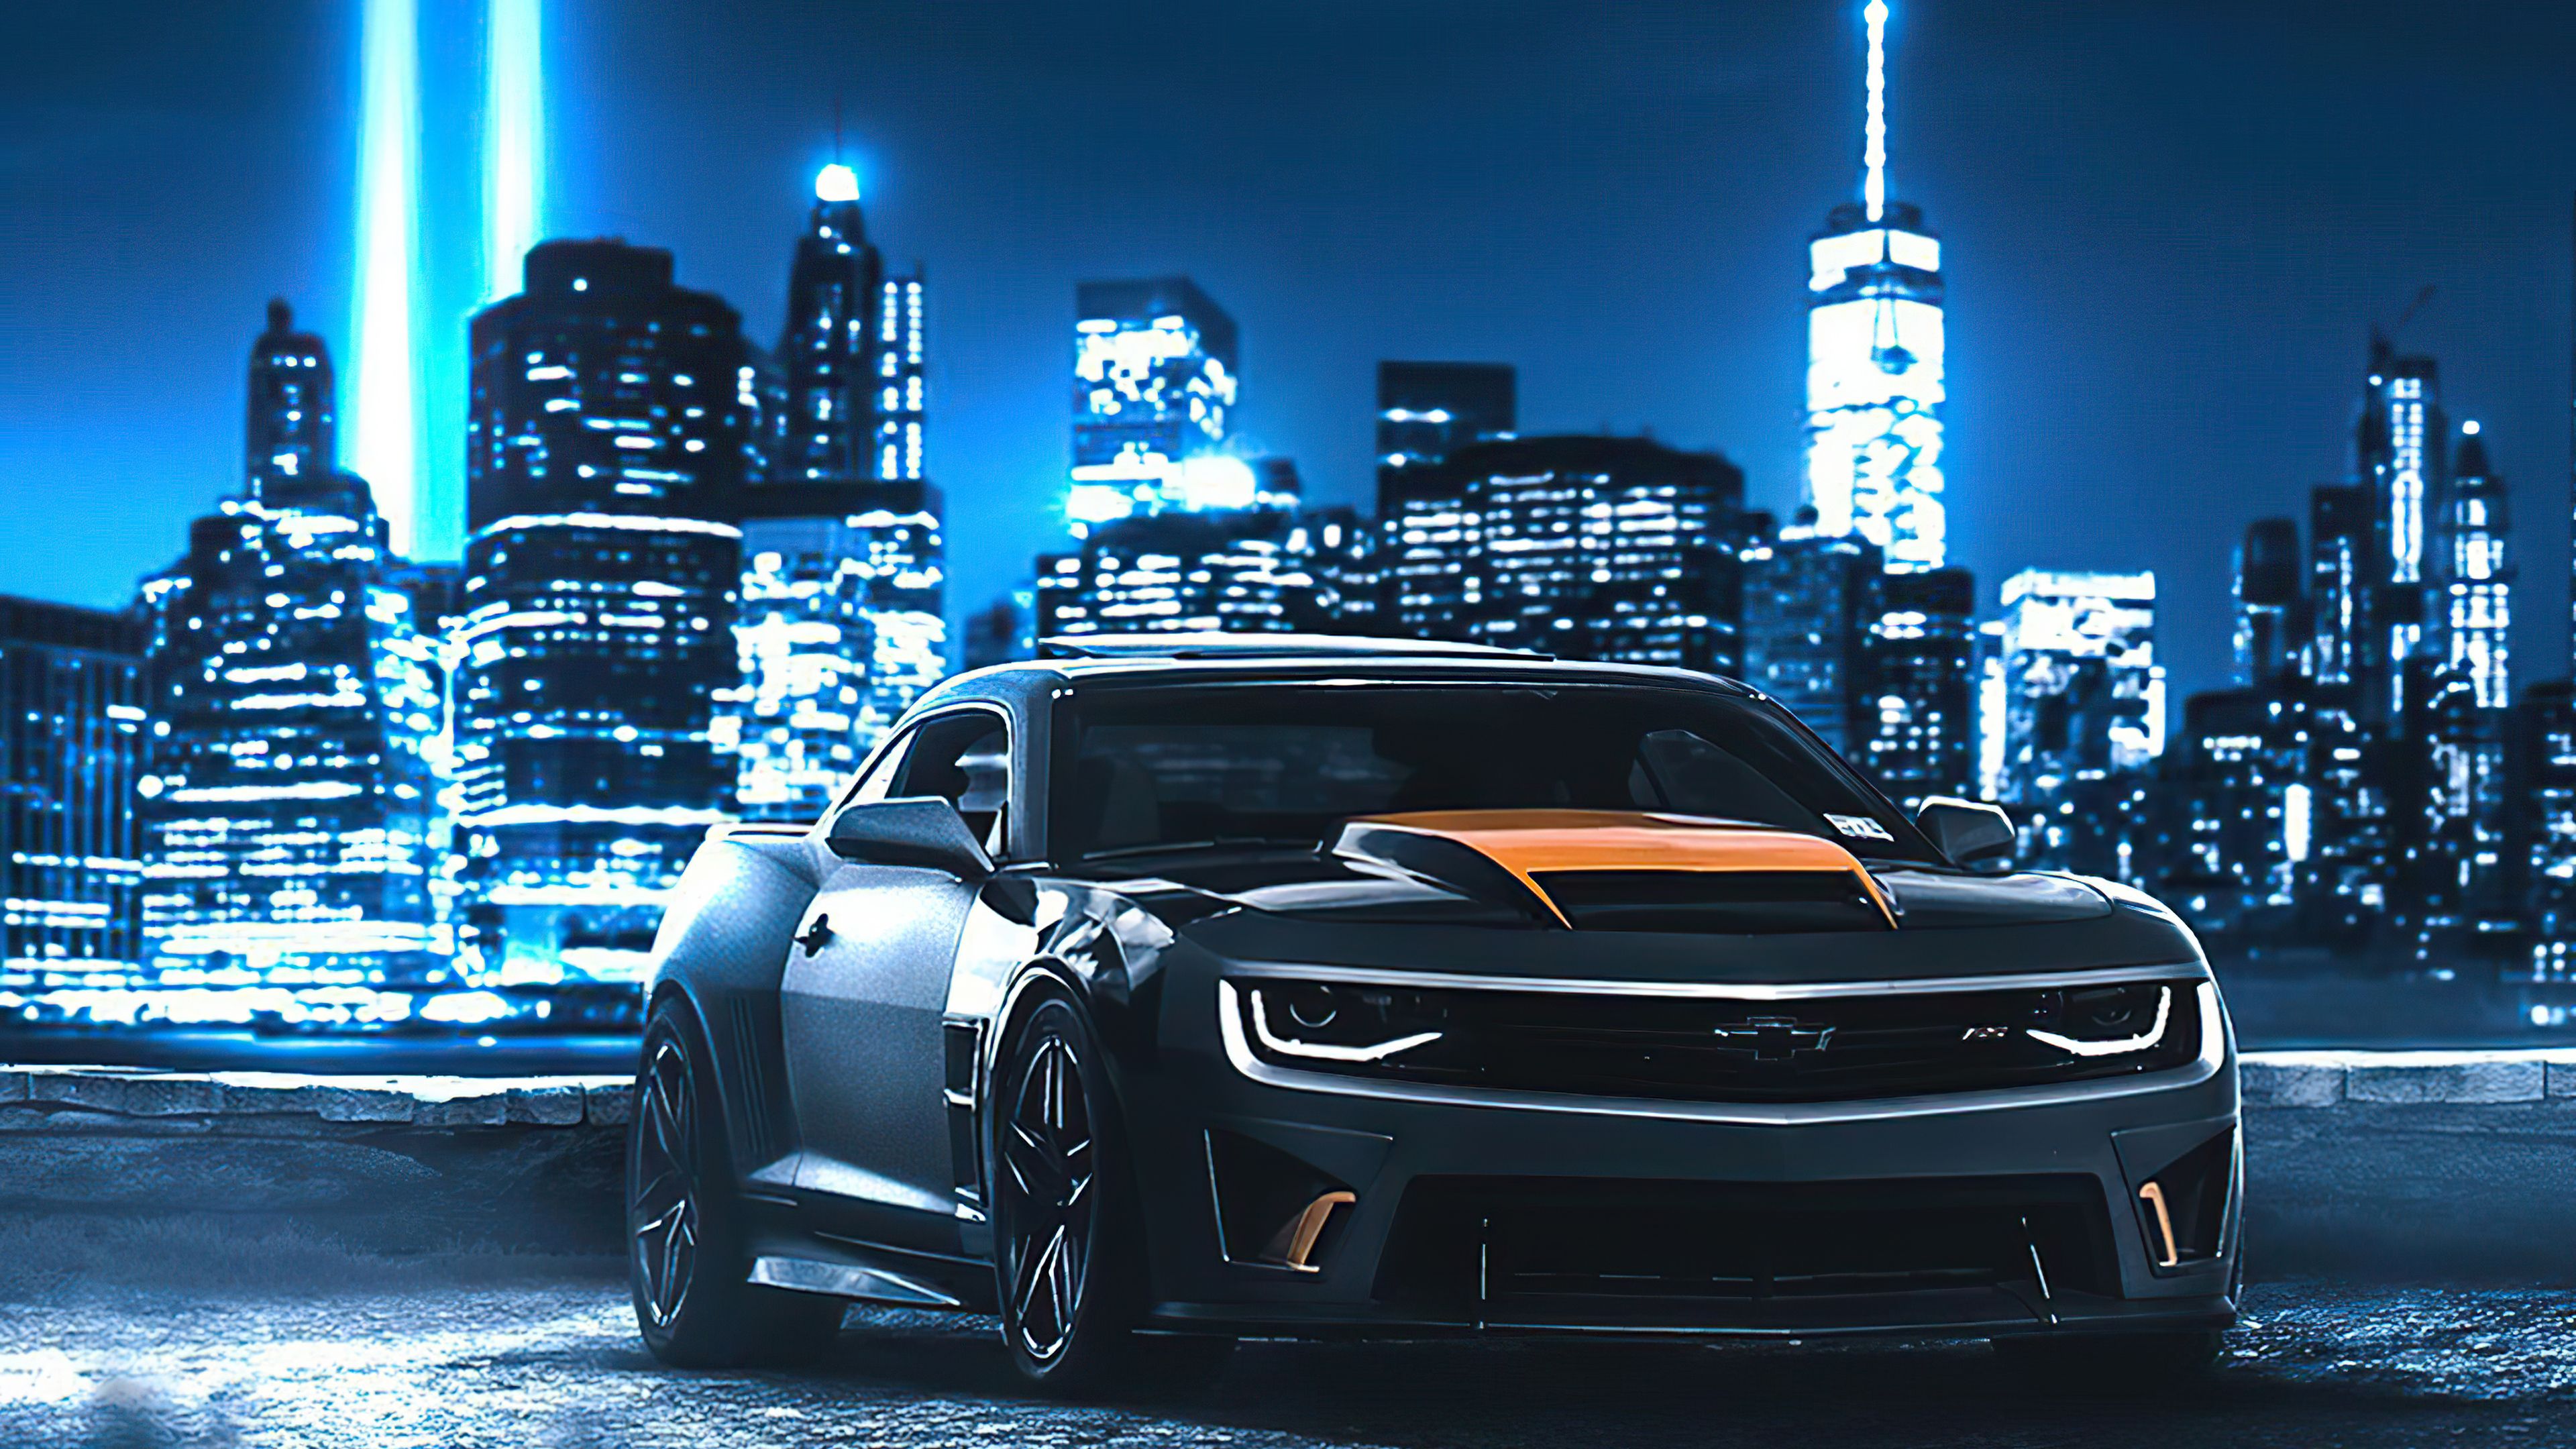 Camaro In Neon City 4k, HD Cars, 4k Wallpaper, Image, Background, Photo and Picture